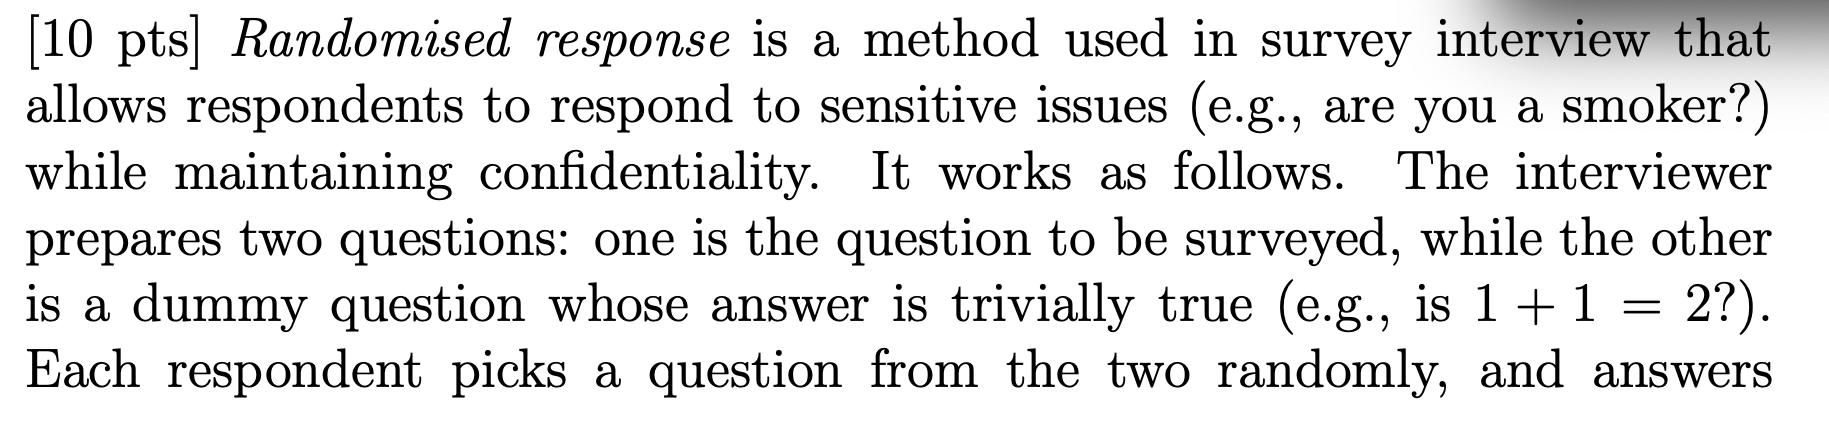 [10 pts) Randomised response is a method used in survey interview that allows respondents to respond to sensitive issues (e.g